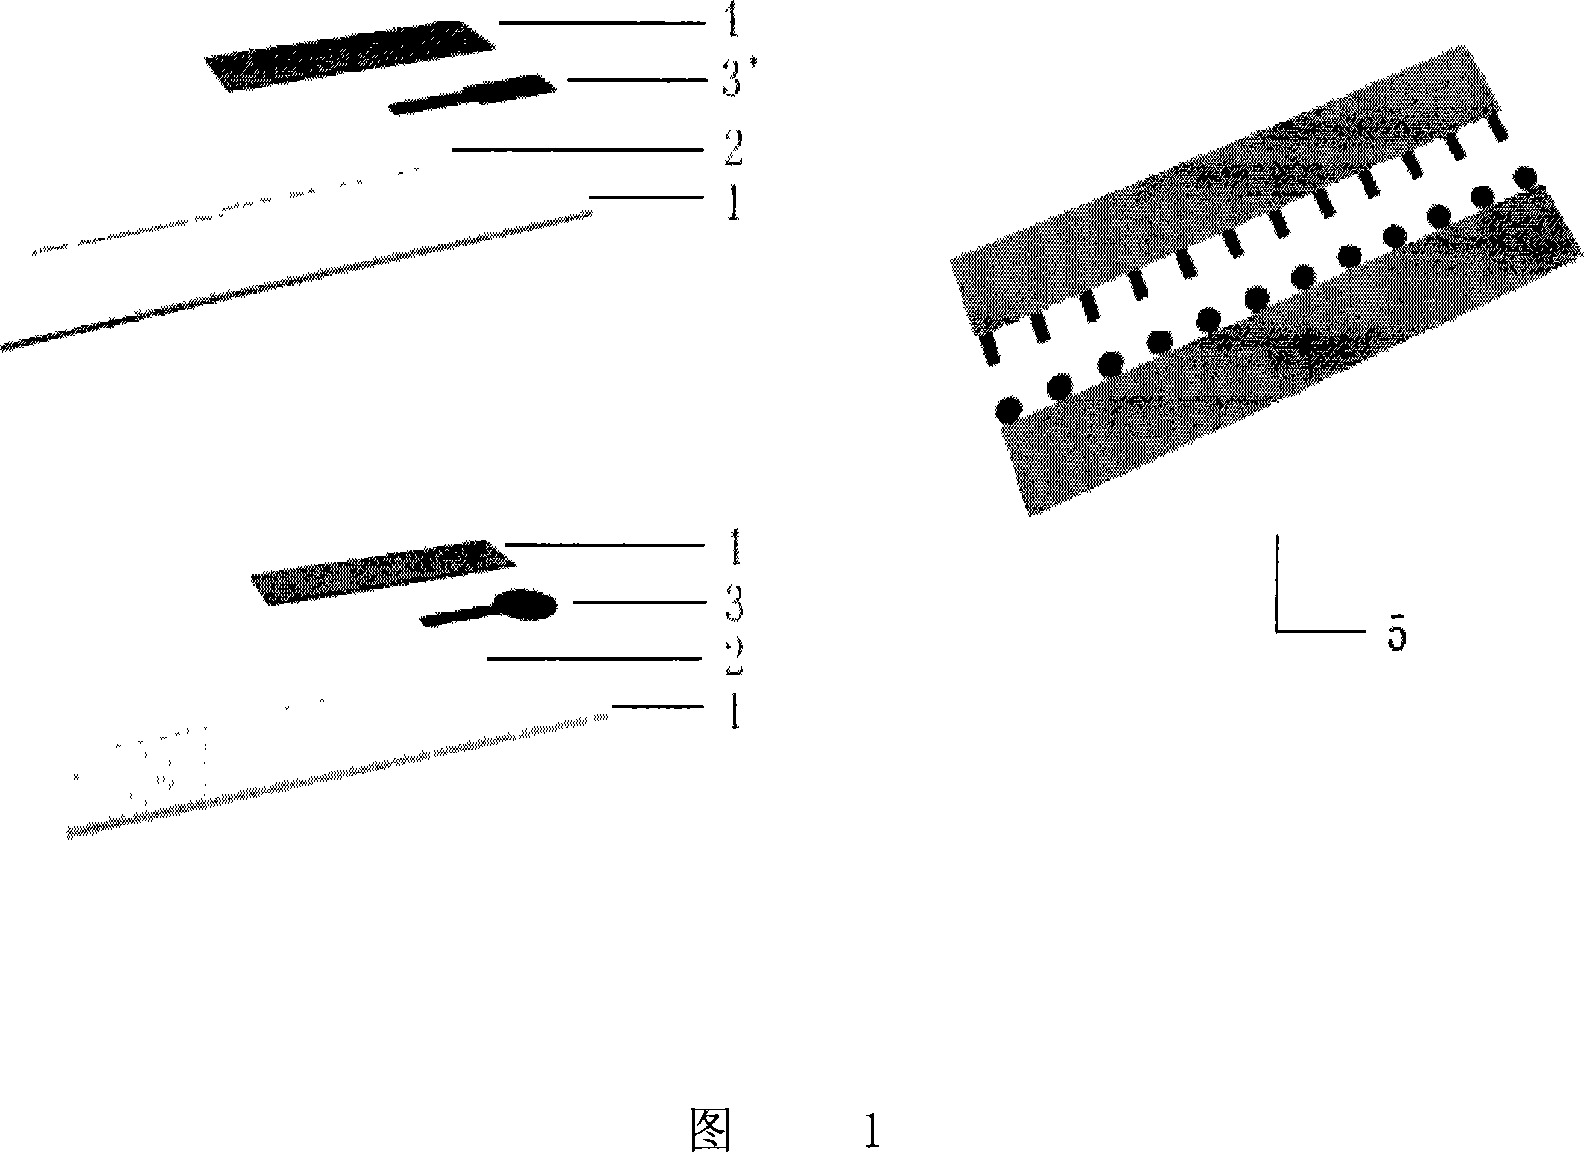 DNA biosensor electrode manufacture method and uses thereof